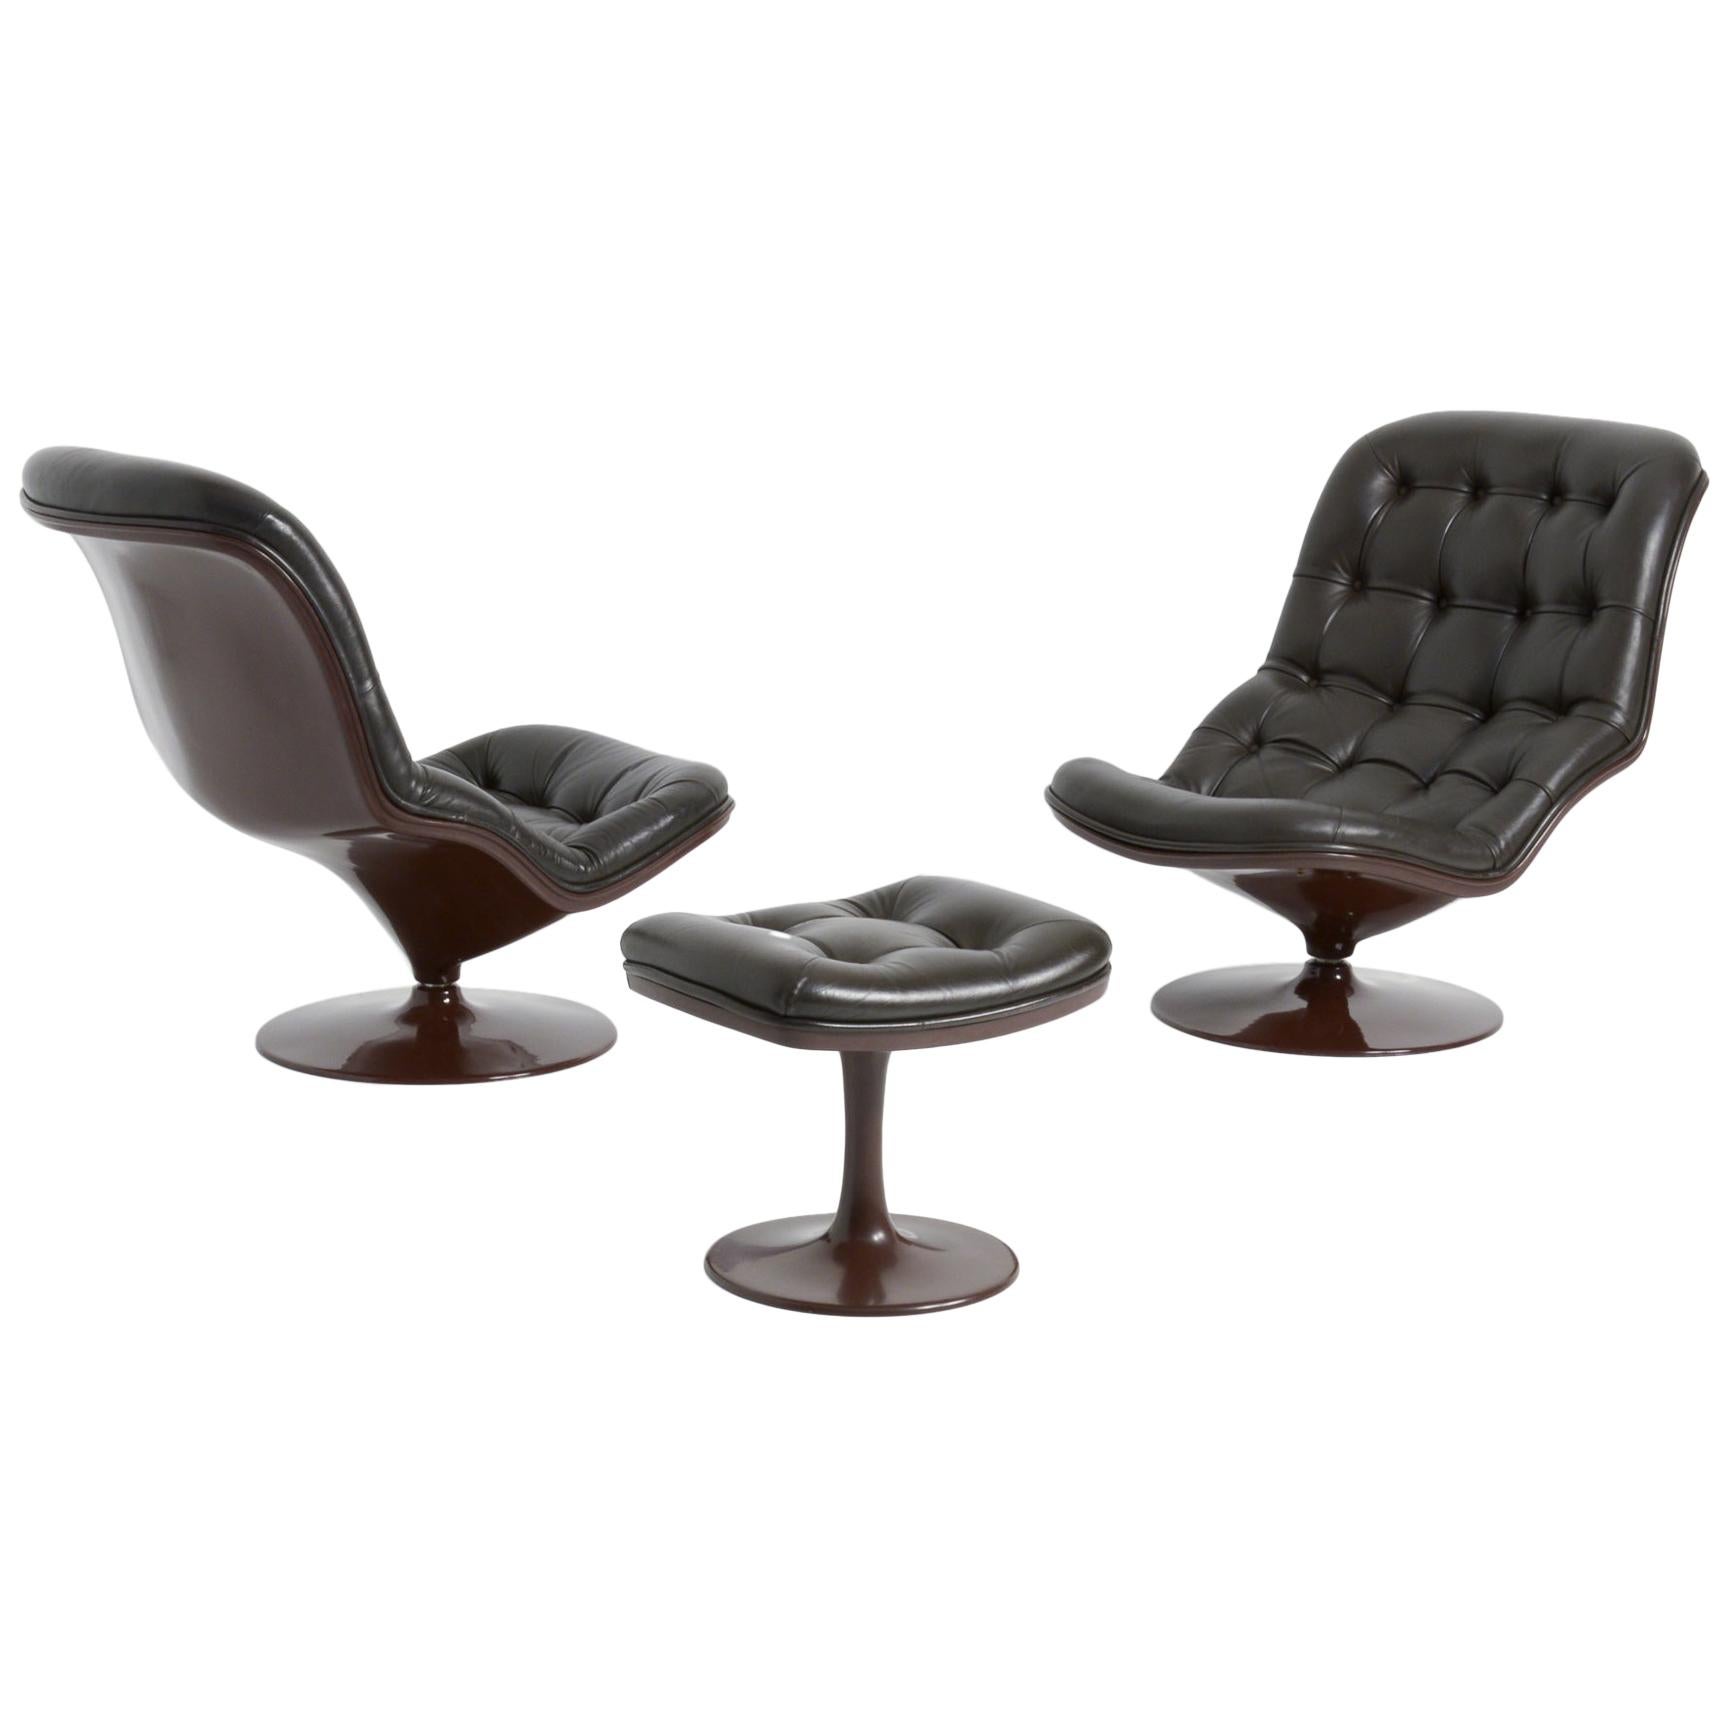 Pair of Shelby Lounge Chairs with Ottoman by Georges Van Rijck for Beaufort